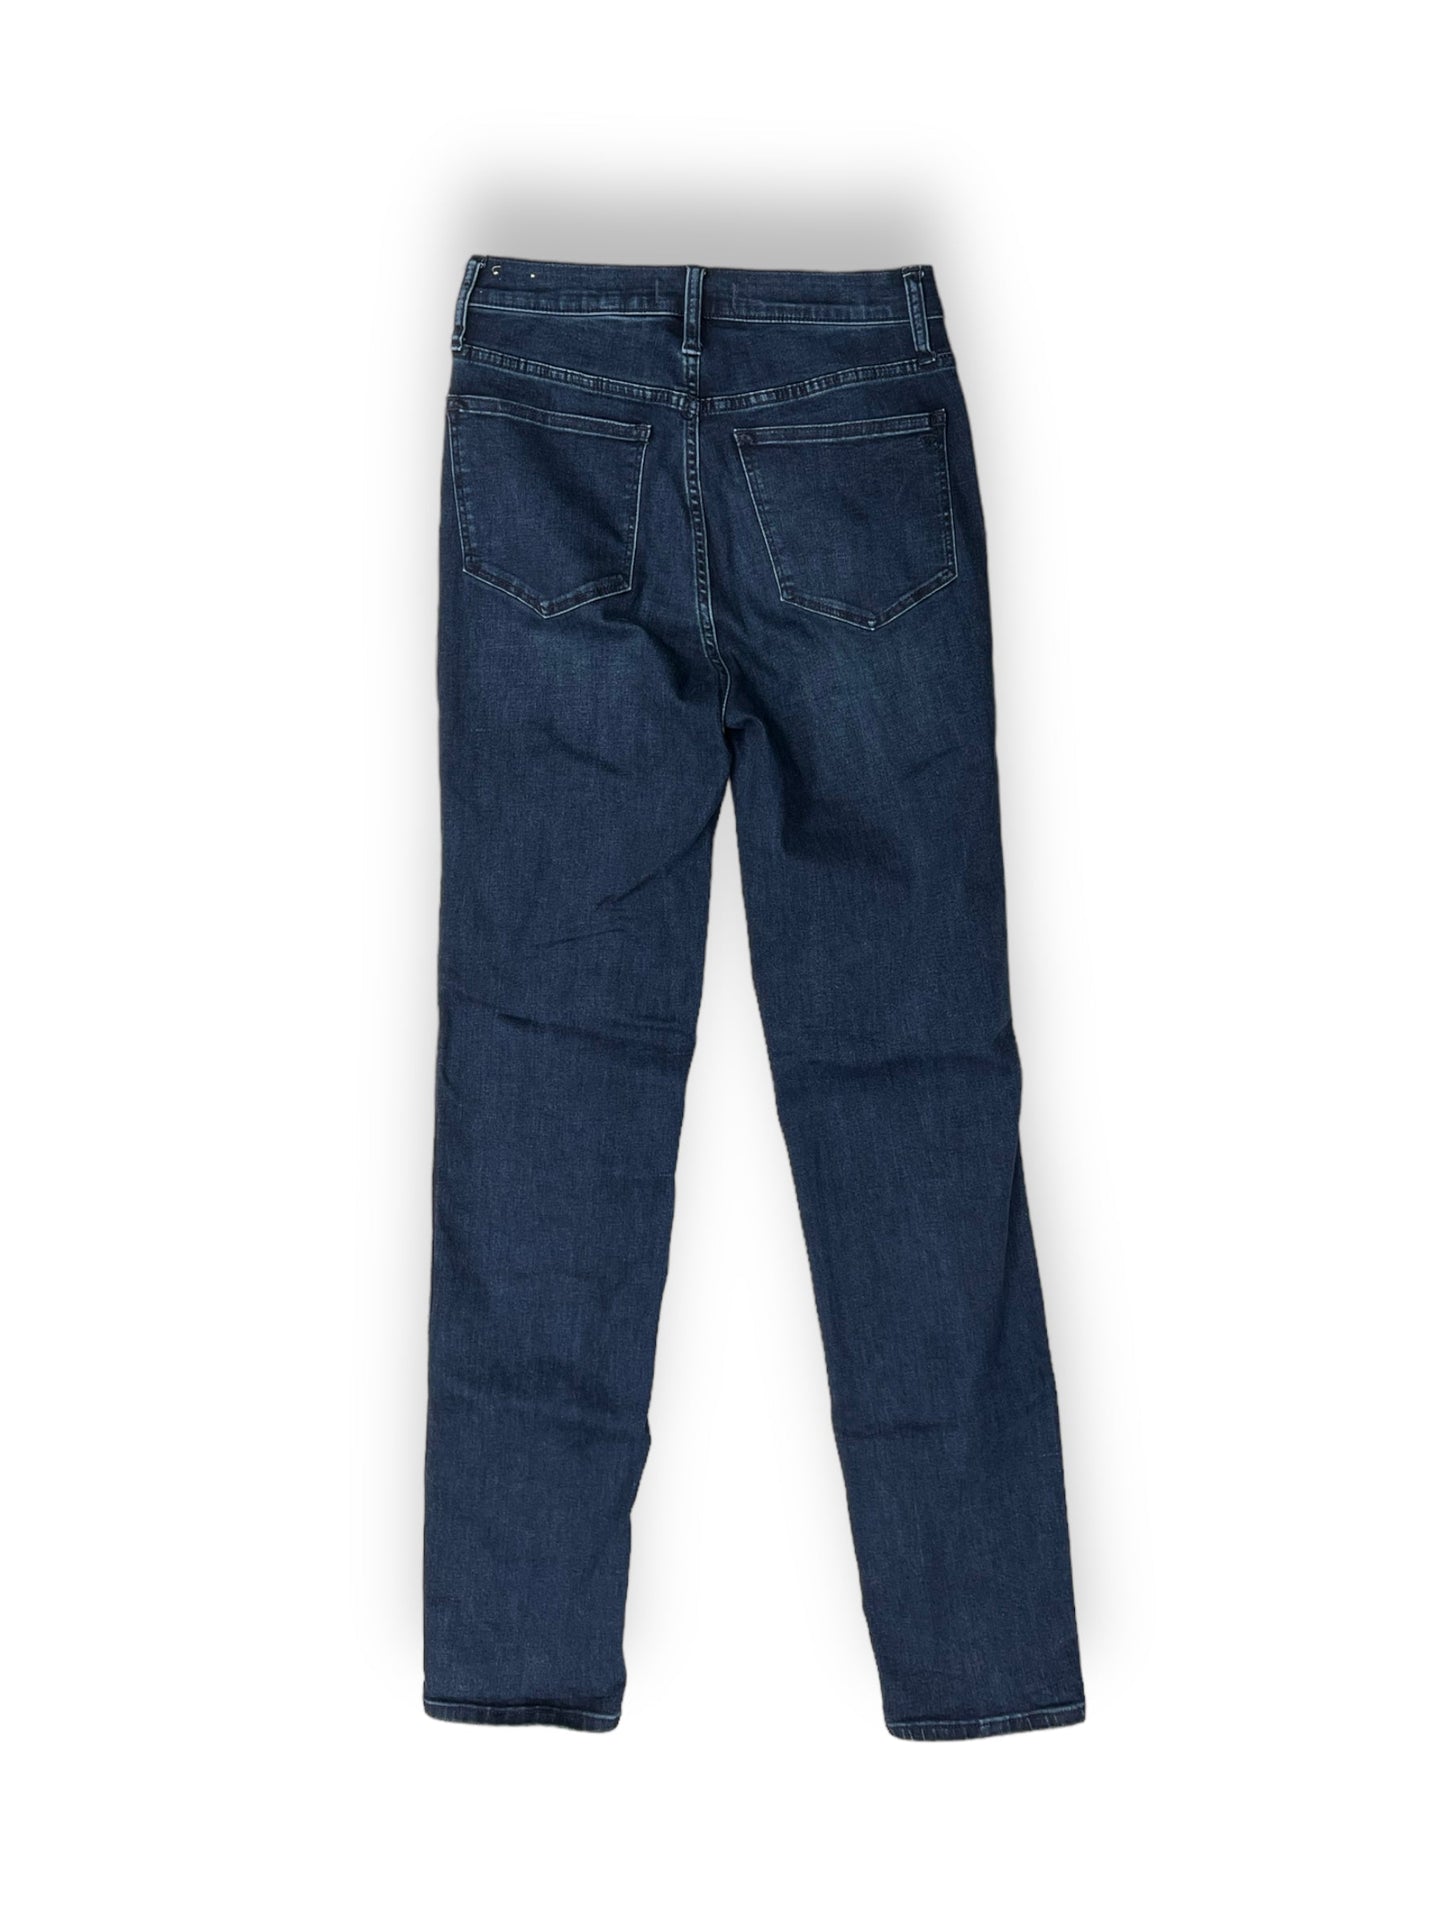 Jeans Straight By Madewell  Size: 26